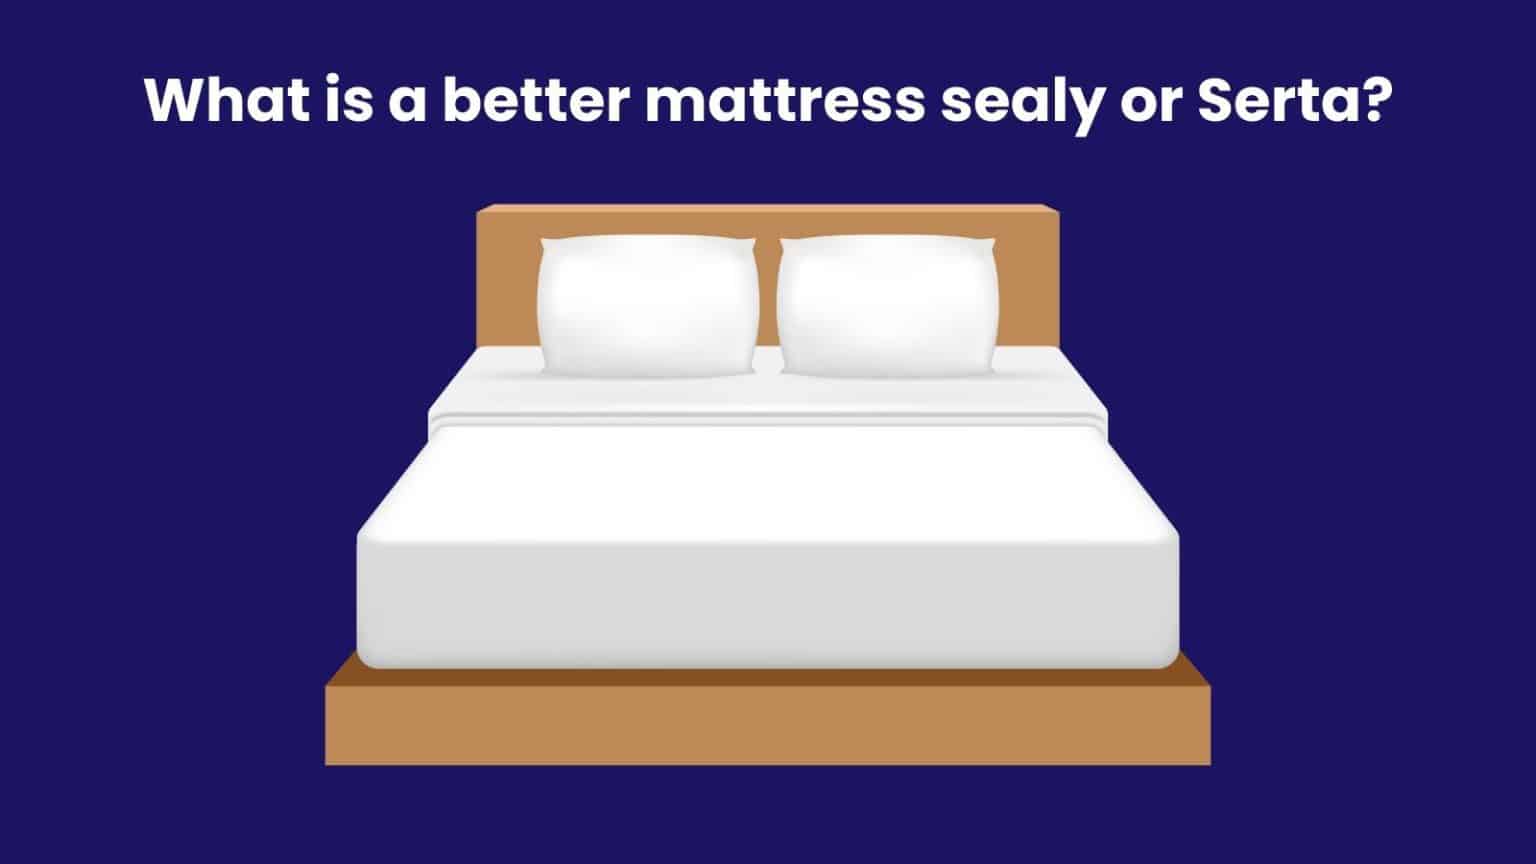 is serta or sealy a better mattress